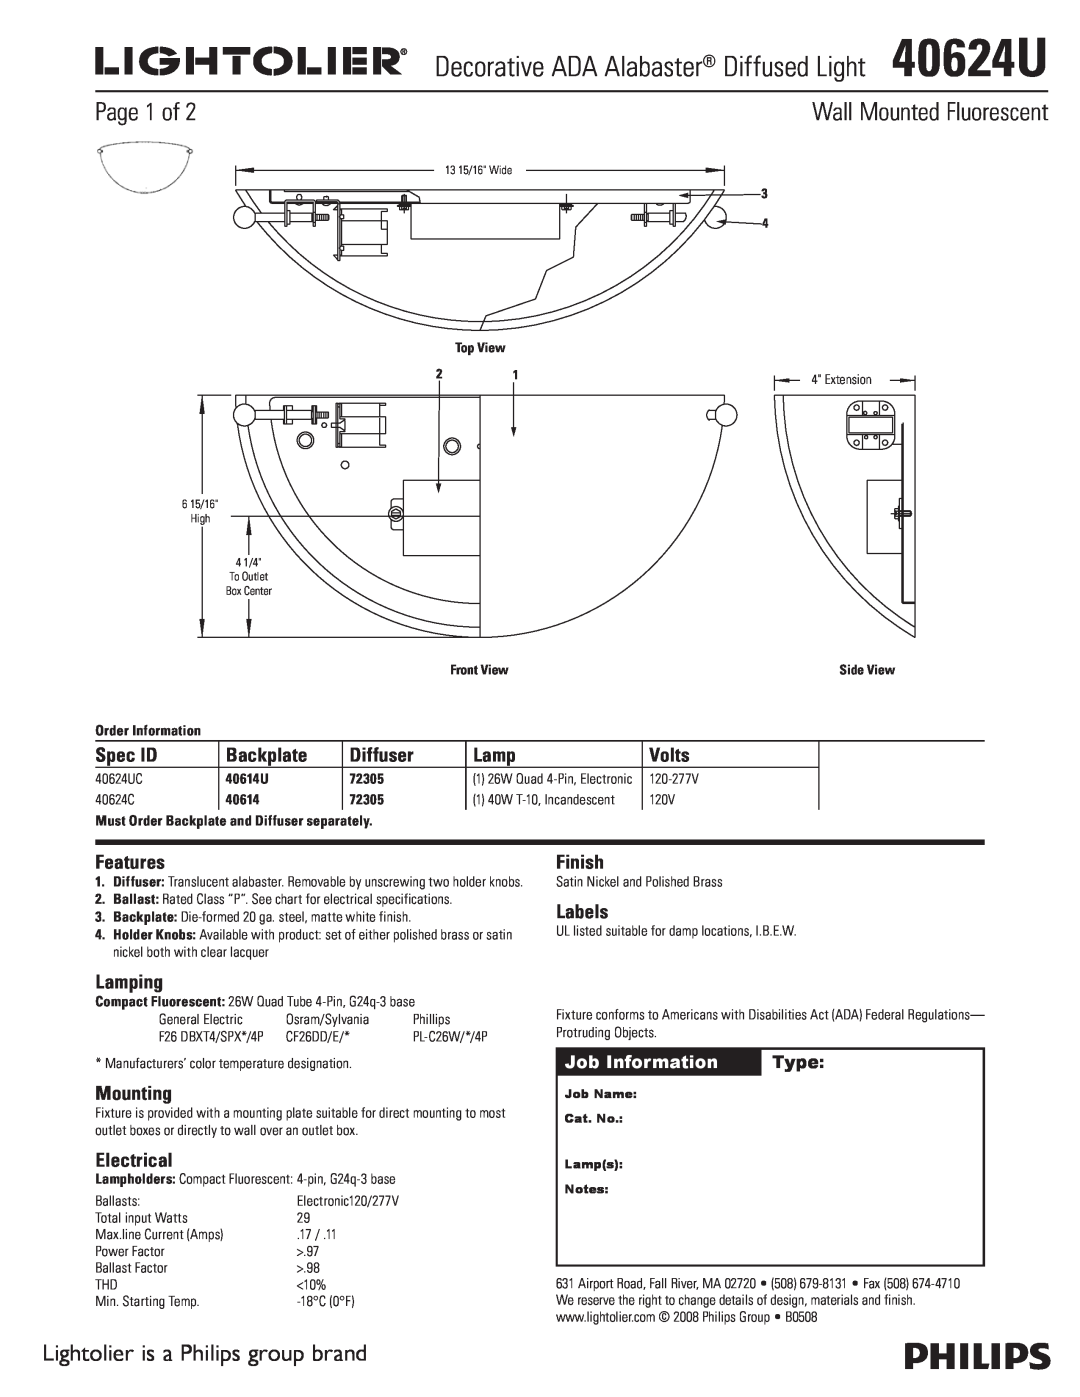 Lightolier 40624U specifications Page 1 of, Wall Mounted Fluorescent, Lightolier is a Philips group brand, Spec ID, Lamp 